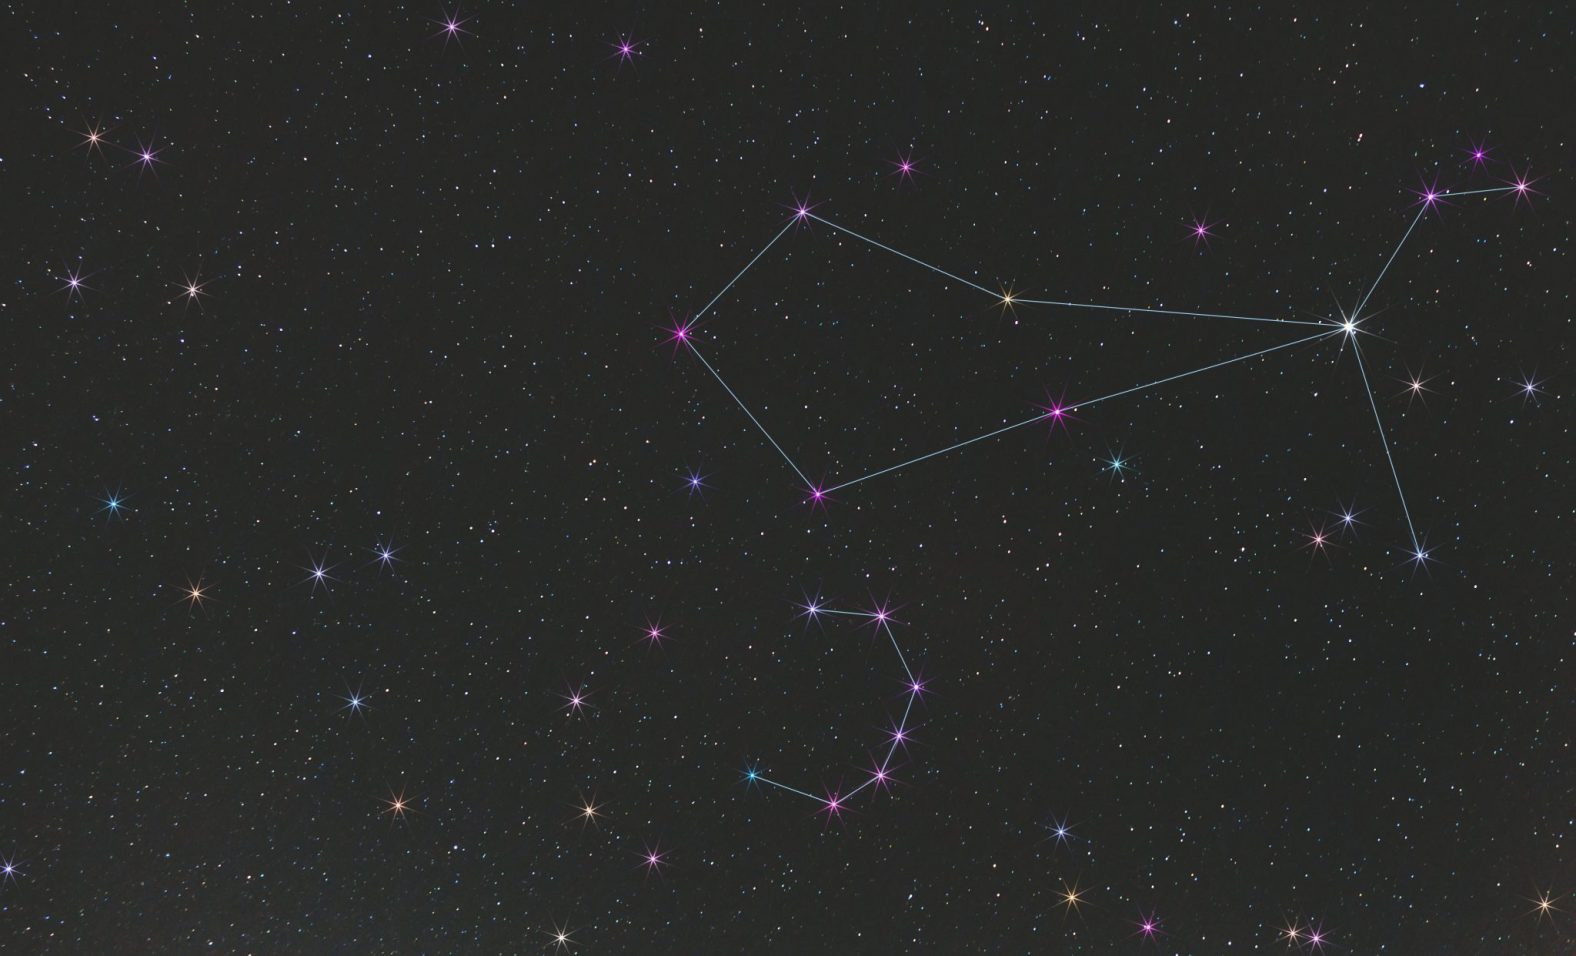 Constellation Bootes and the star Arcturus